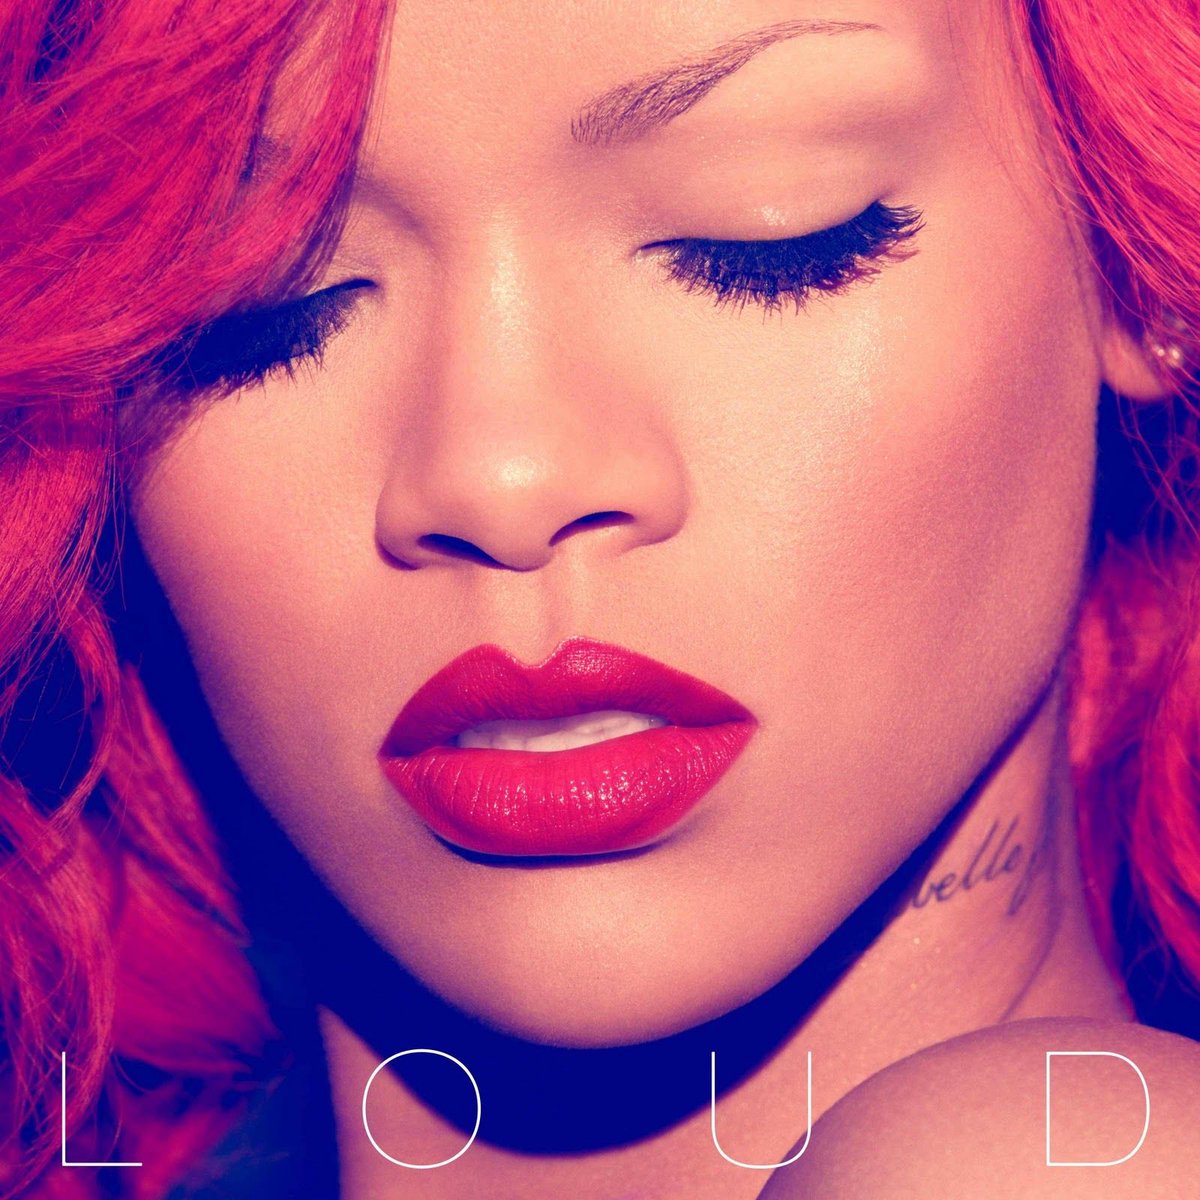 top 3 from loud by rihanna